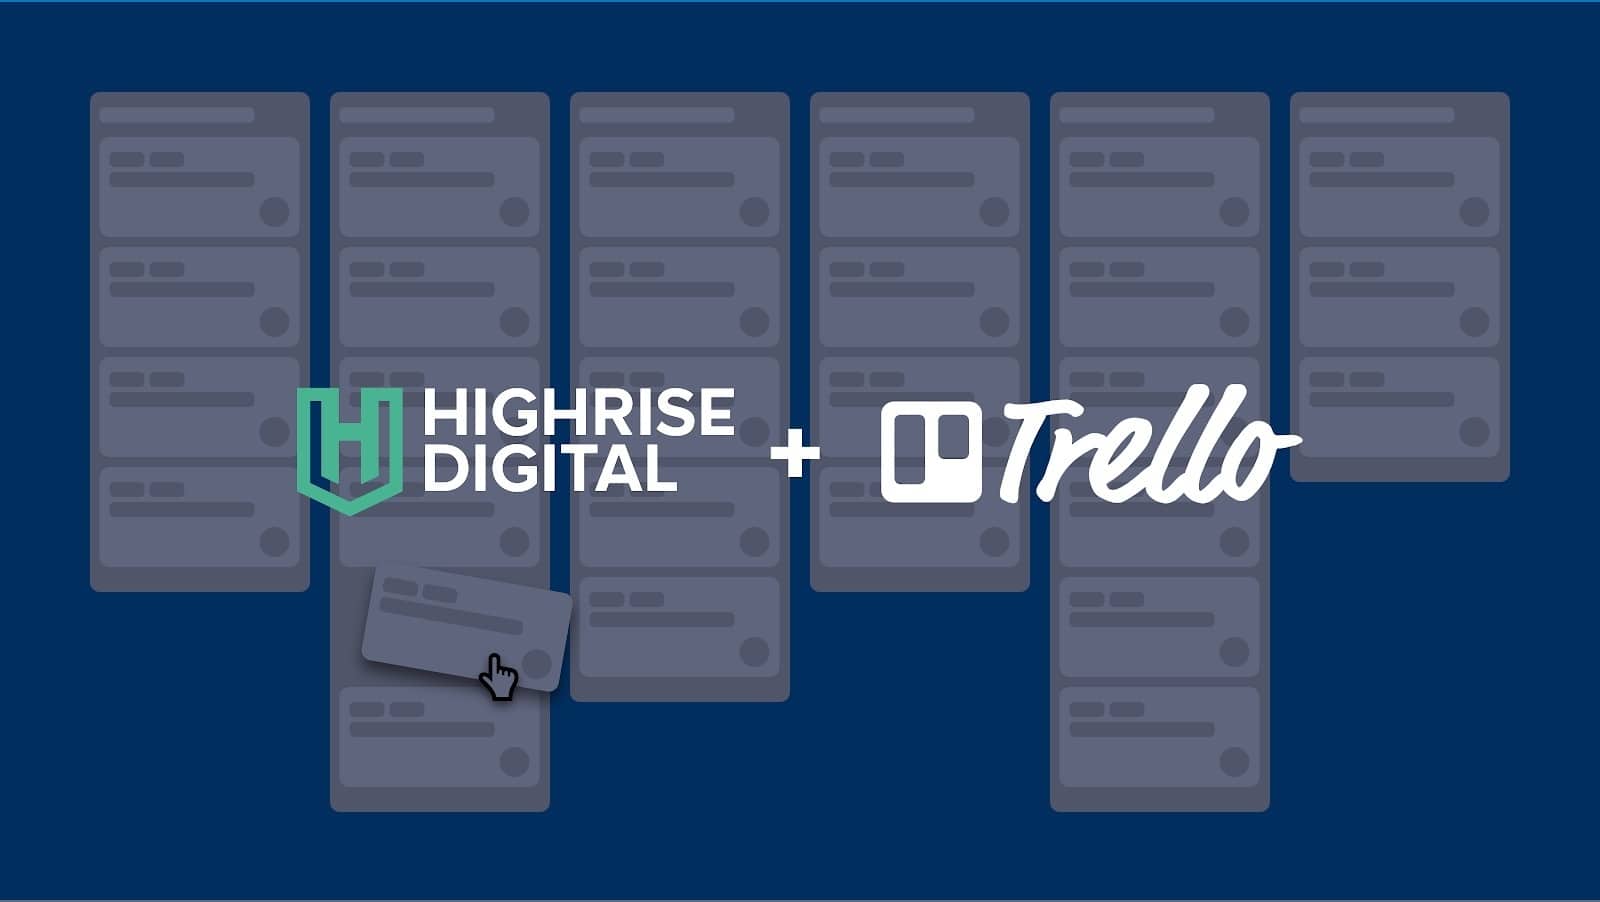 How to Use Trello For Project Management